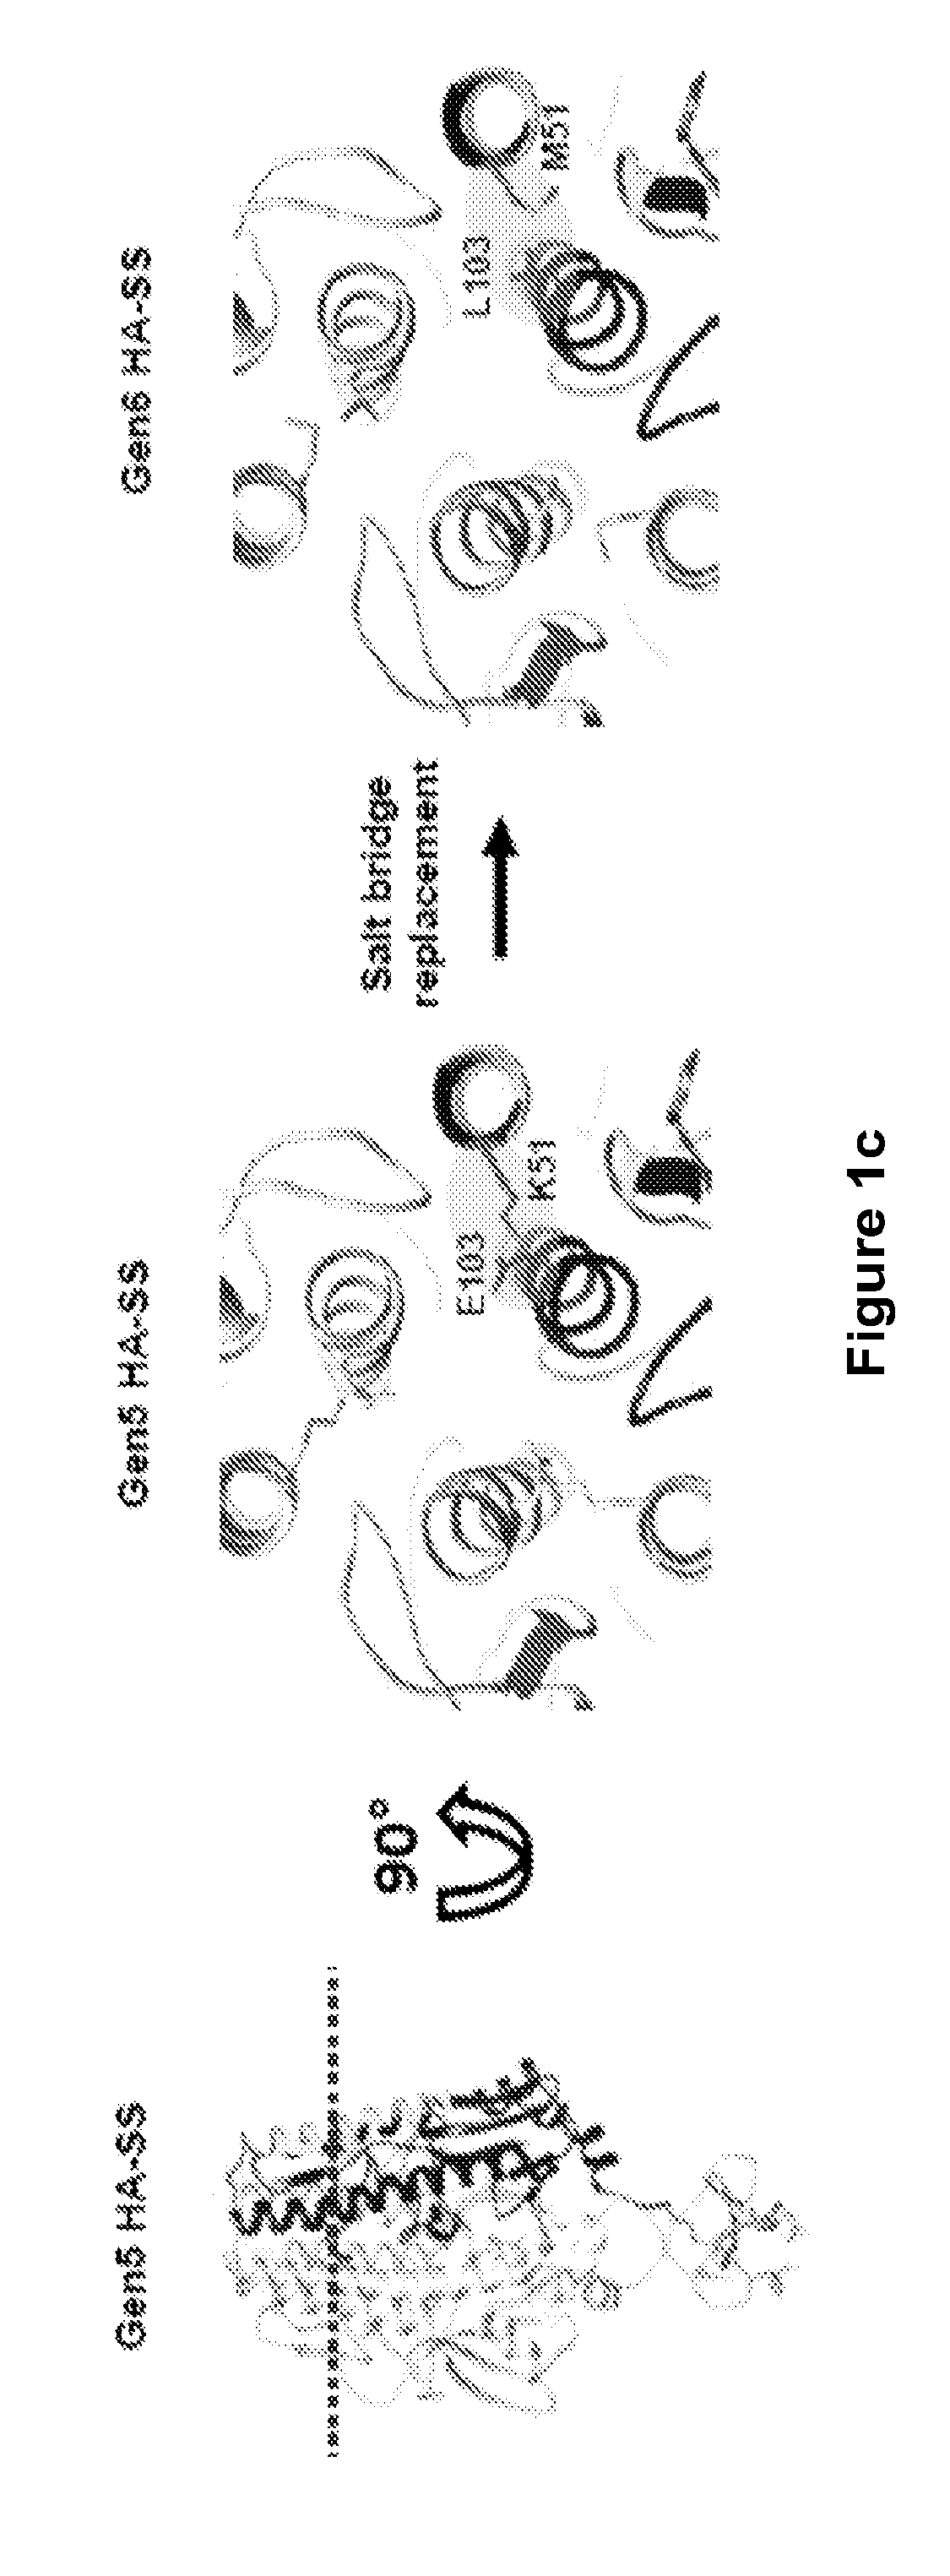 Stabilized influenza hemagglutinin stem region trimers and uses thereof